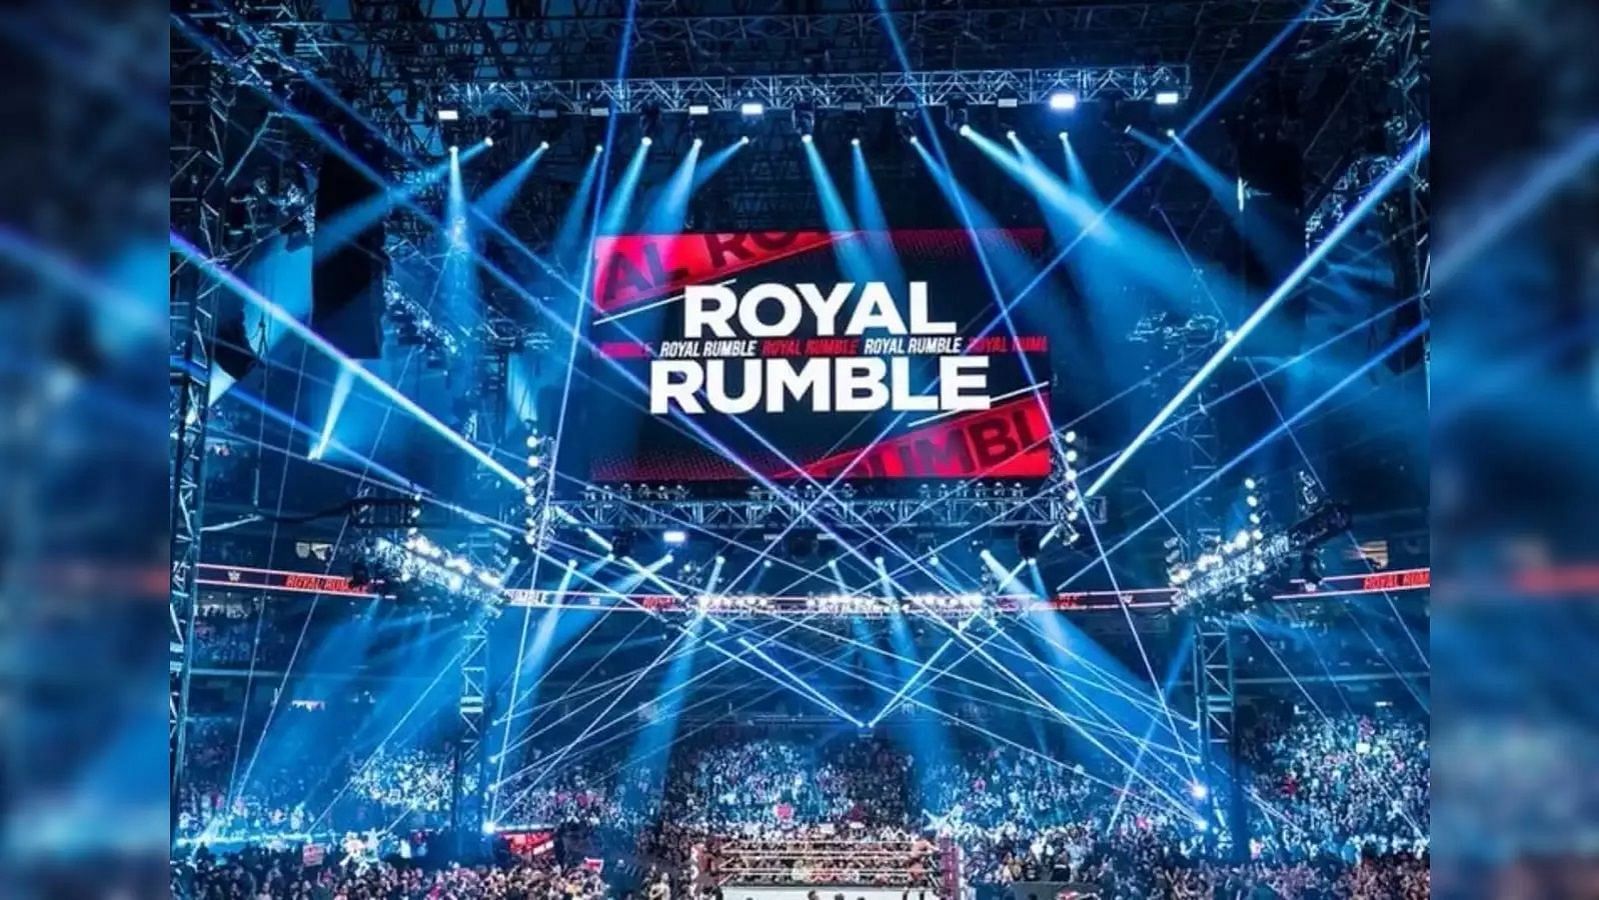 Will it finally happen at The Royal Rumble?